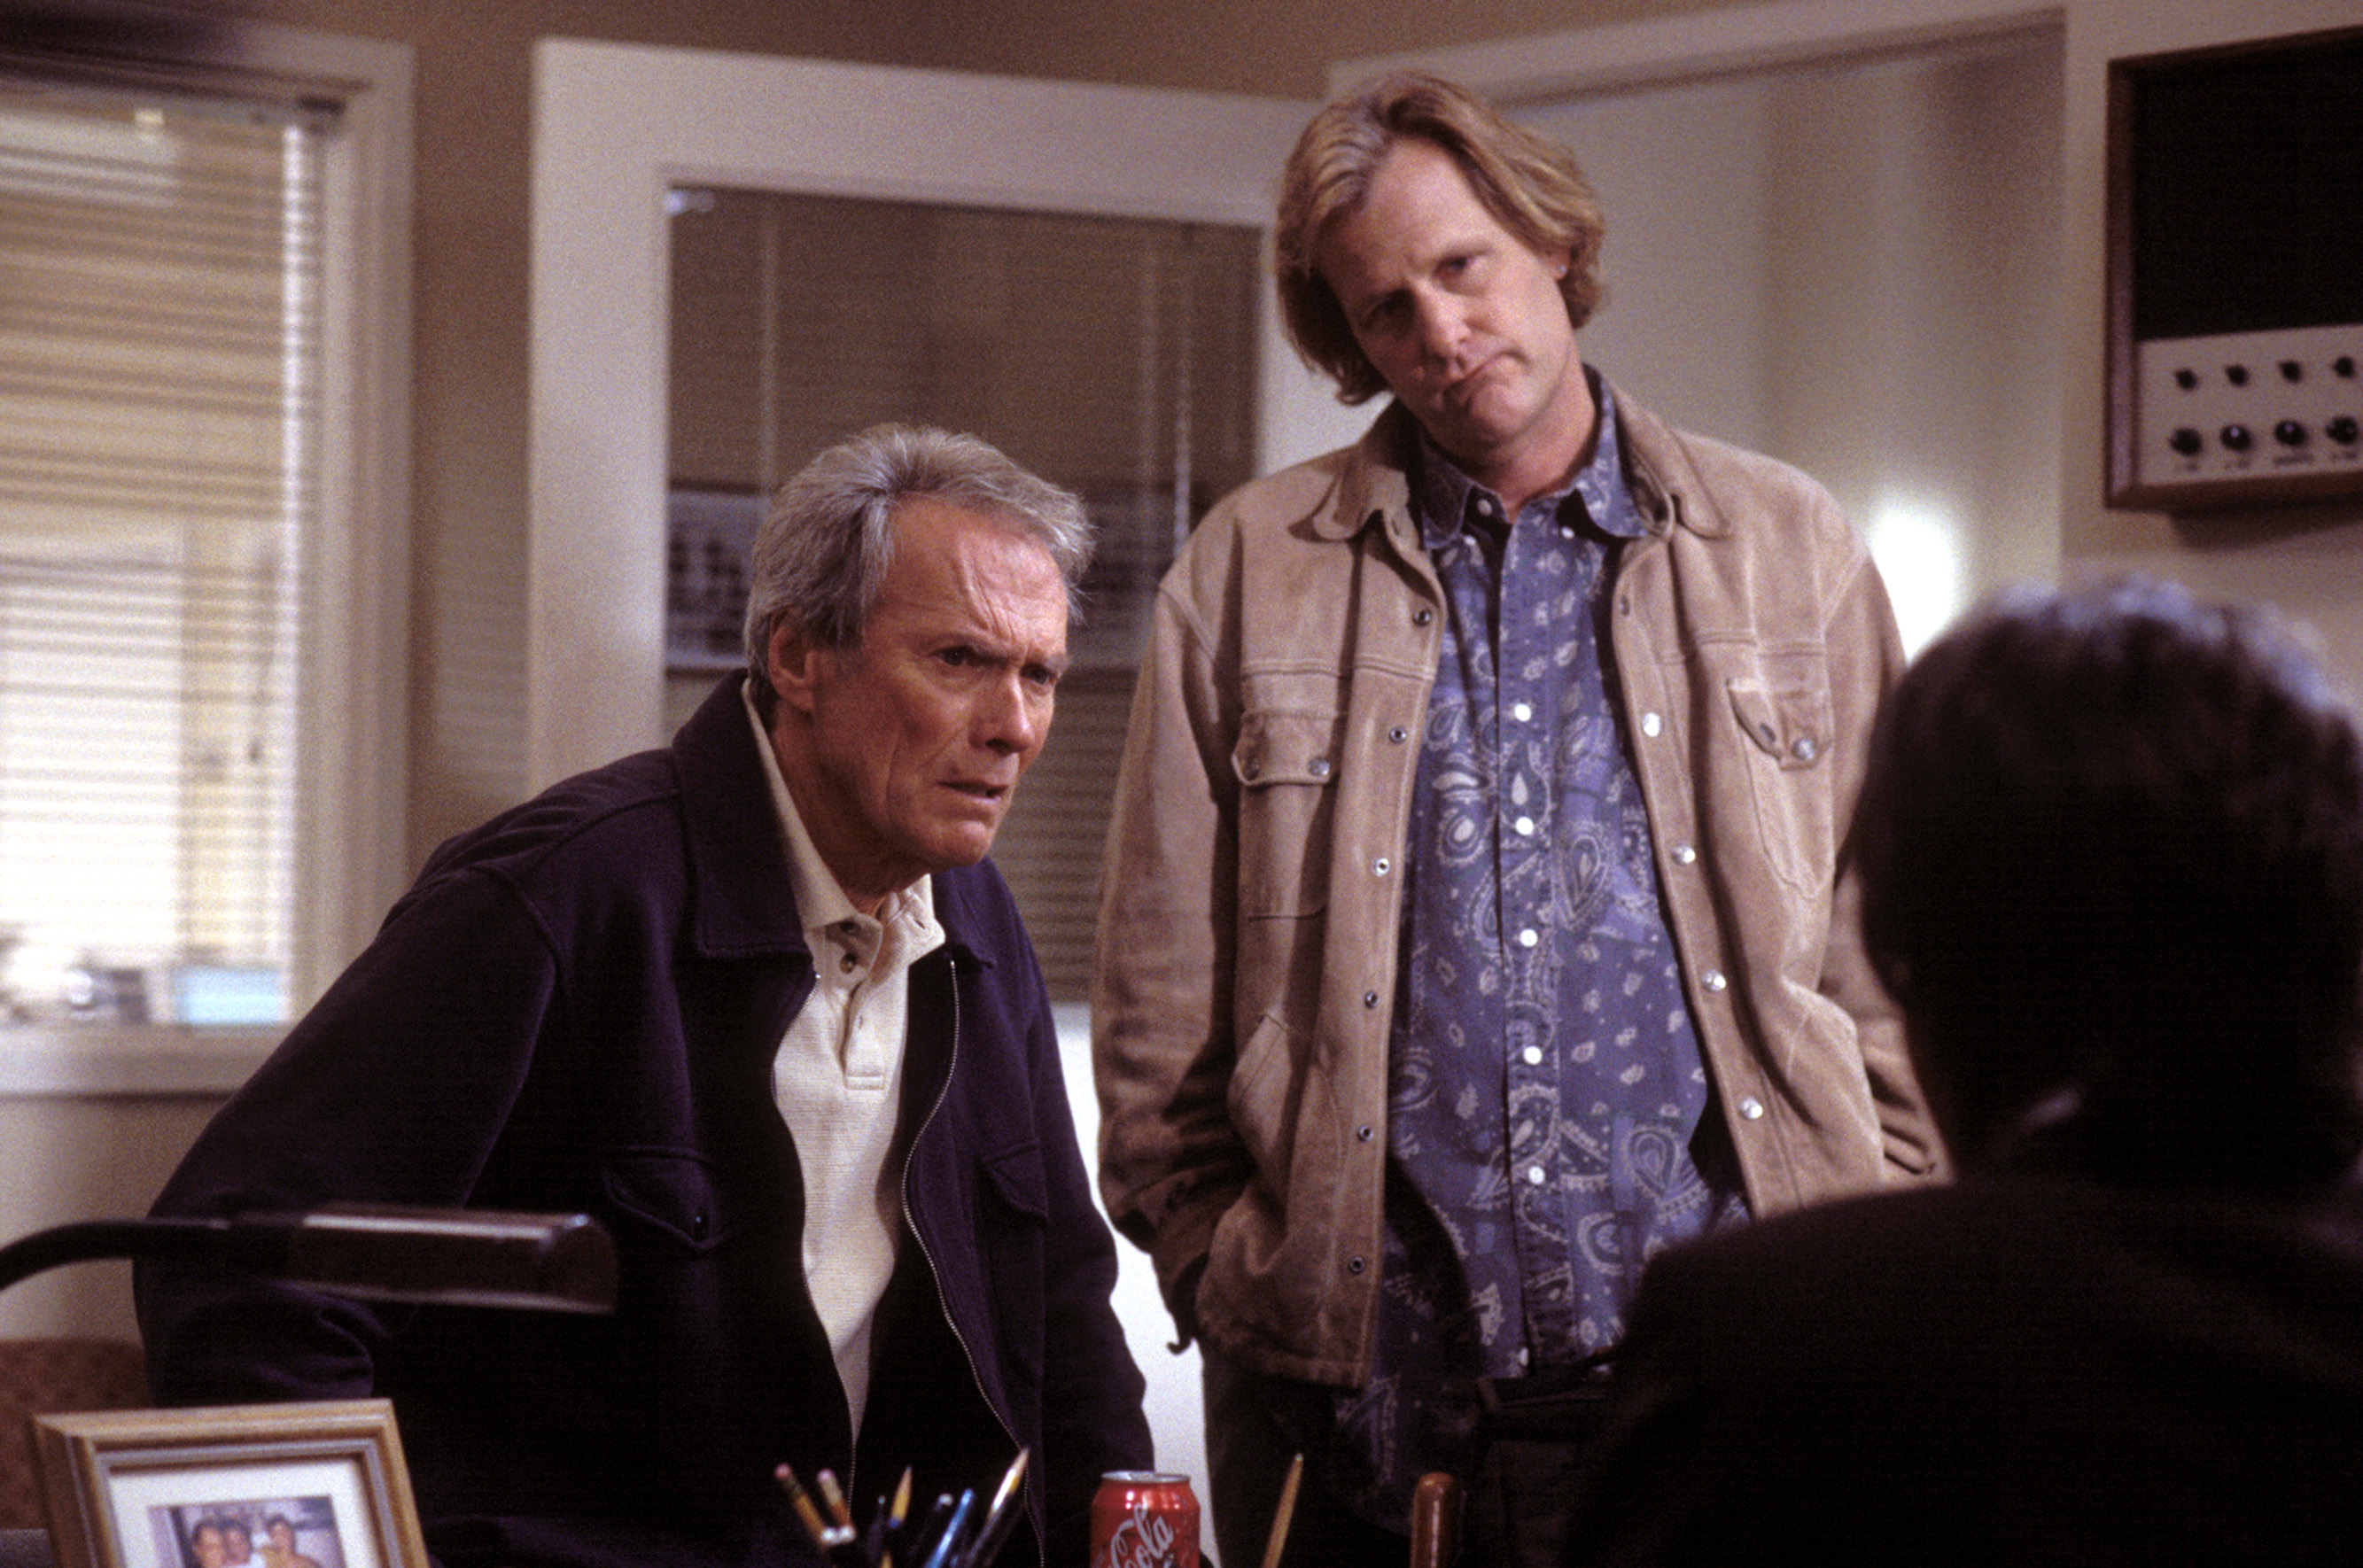 'BLOOD WORK,' Clint Eastwood, Jeff Daniels, 2002, (c) Warner Brothers/courtesy Everett Collection